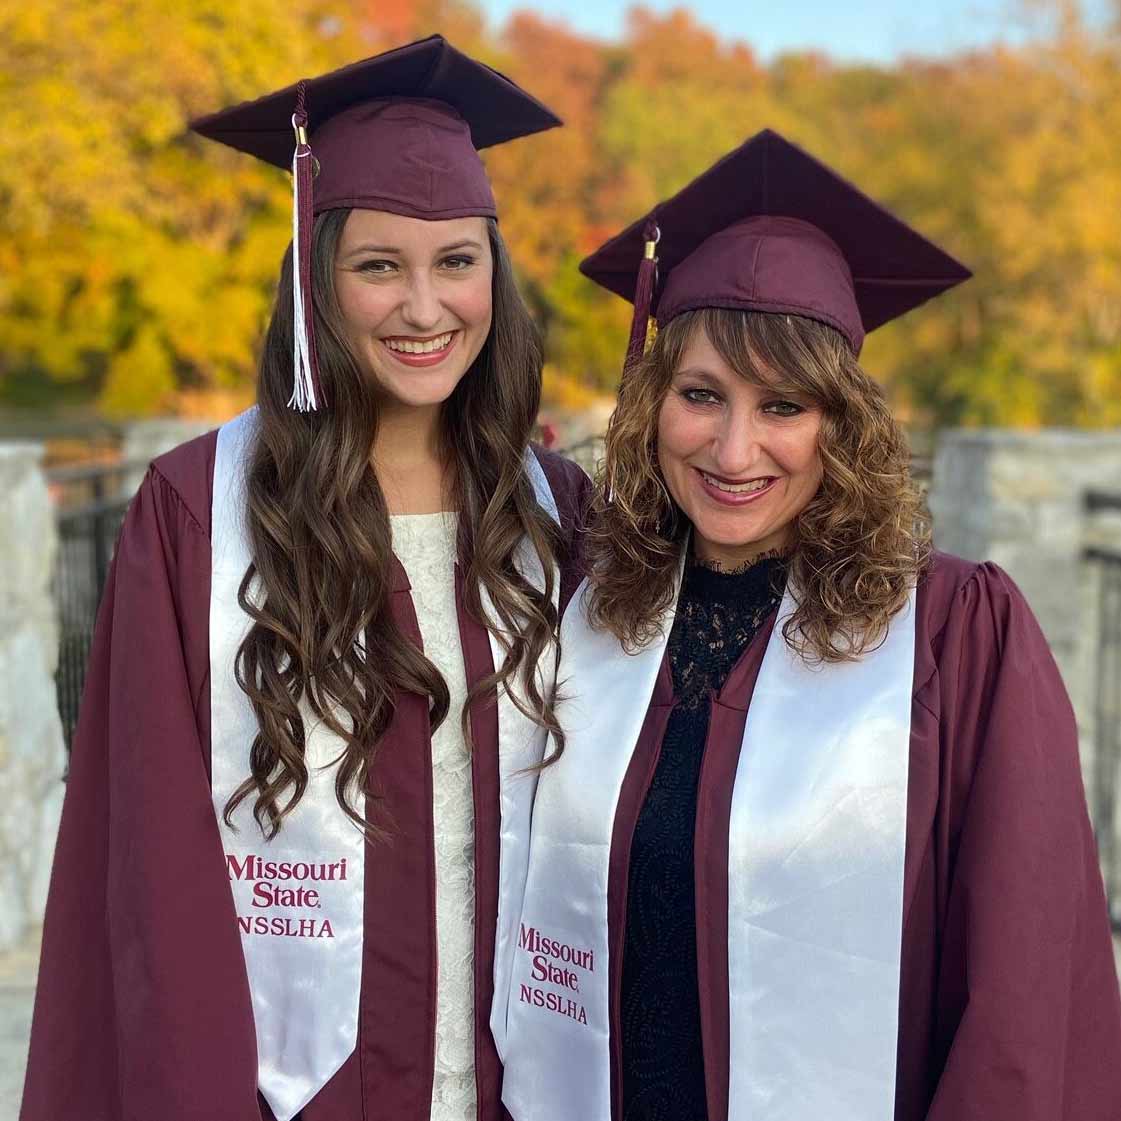 Hannah and Julie Anderson wearing maroon commencement mortarboards and gowns during their graduation